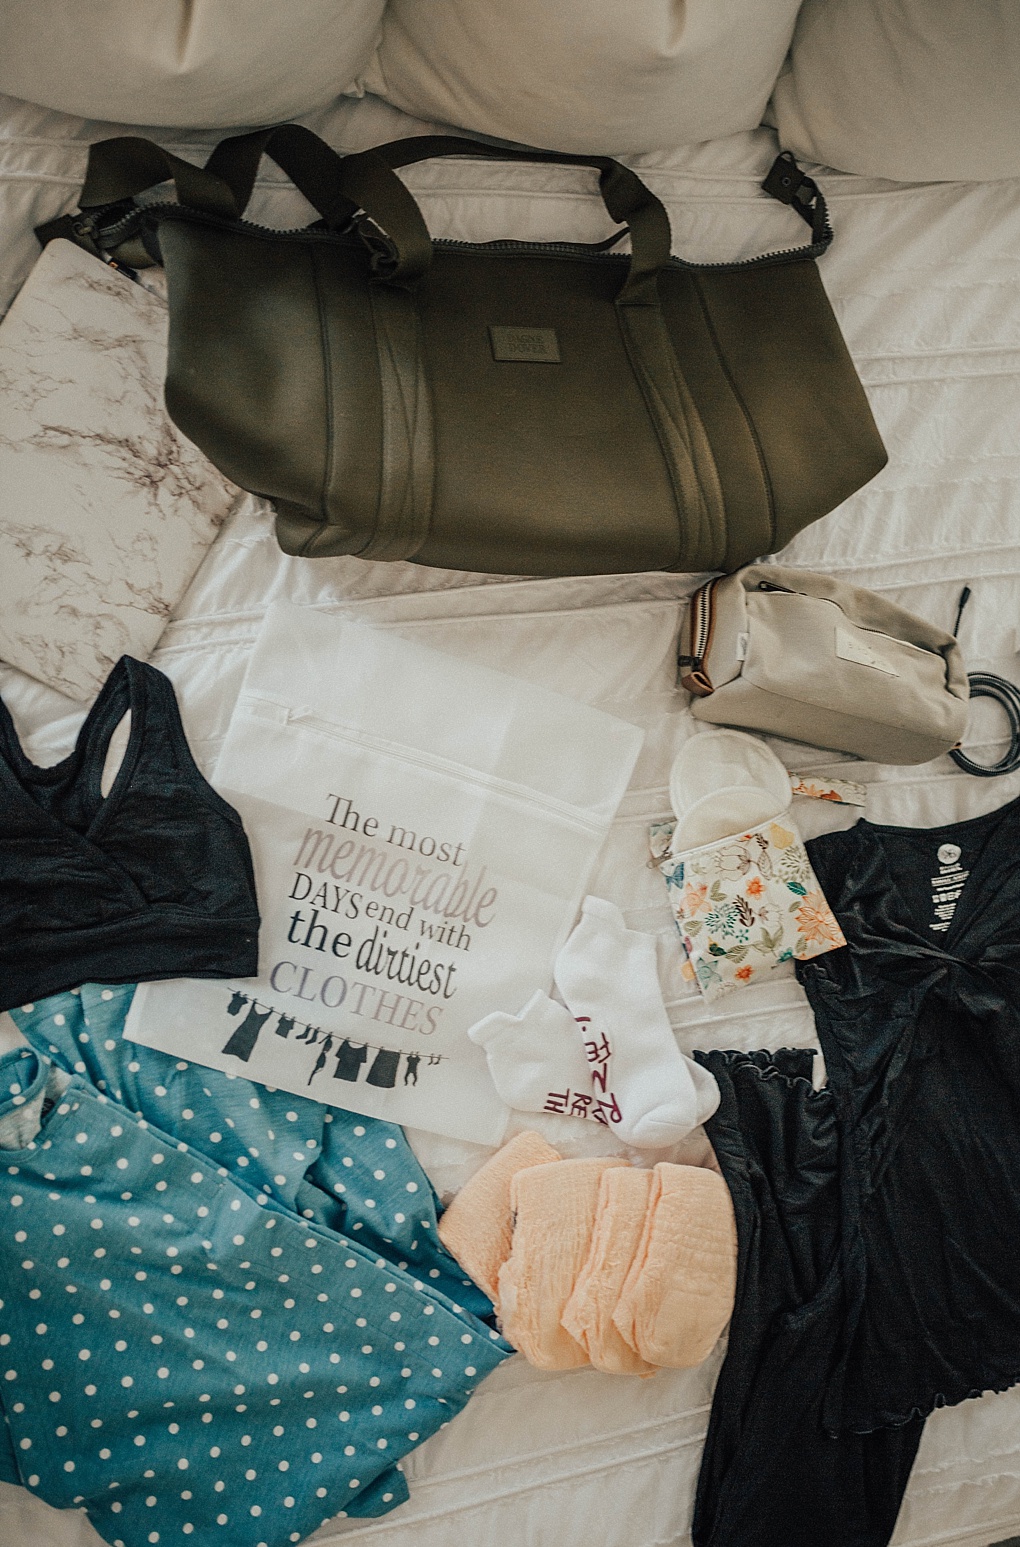 SAVE this post right now! See exactly what Utah Style Blogger Dani Marie is packing in her hospital bag with this pregnancy!